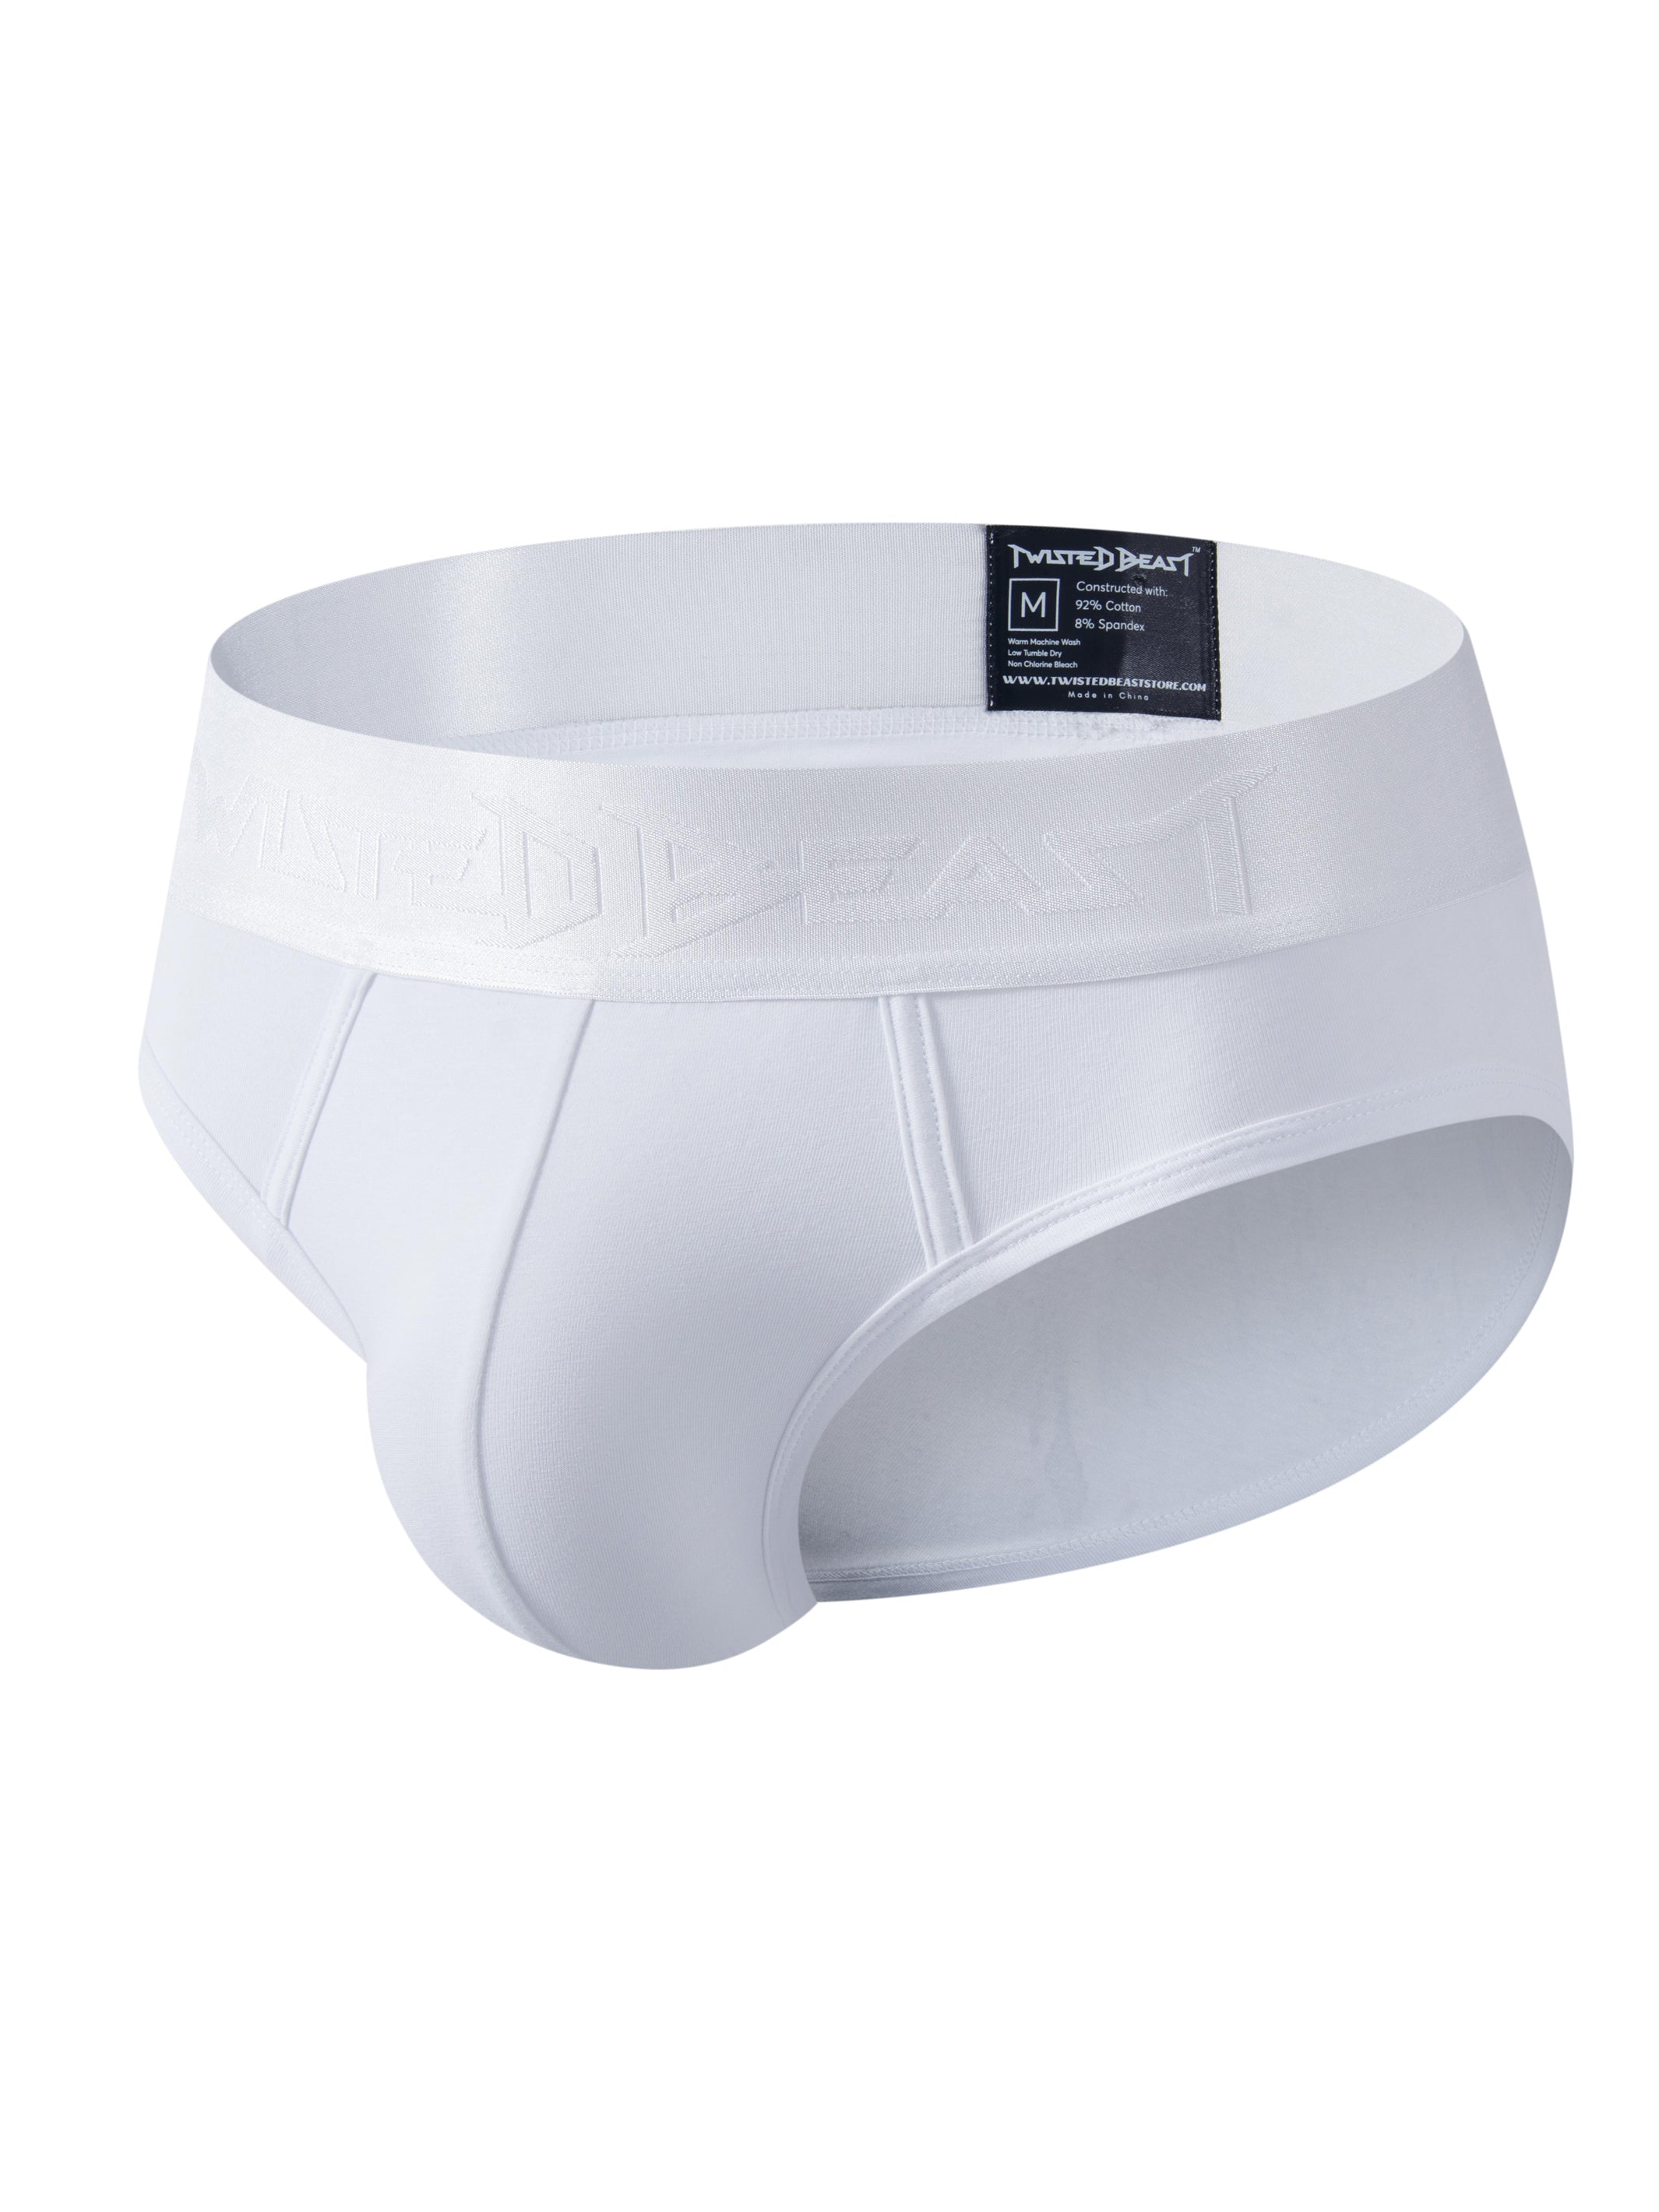 A product photo of a pair of white Phantom Briefs.